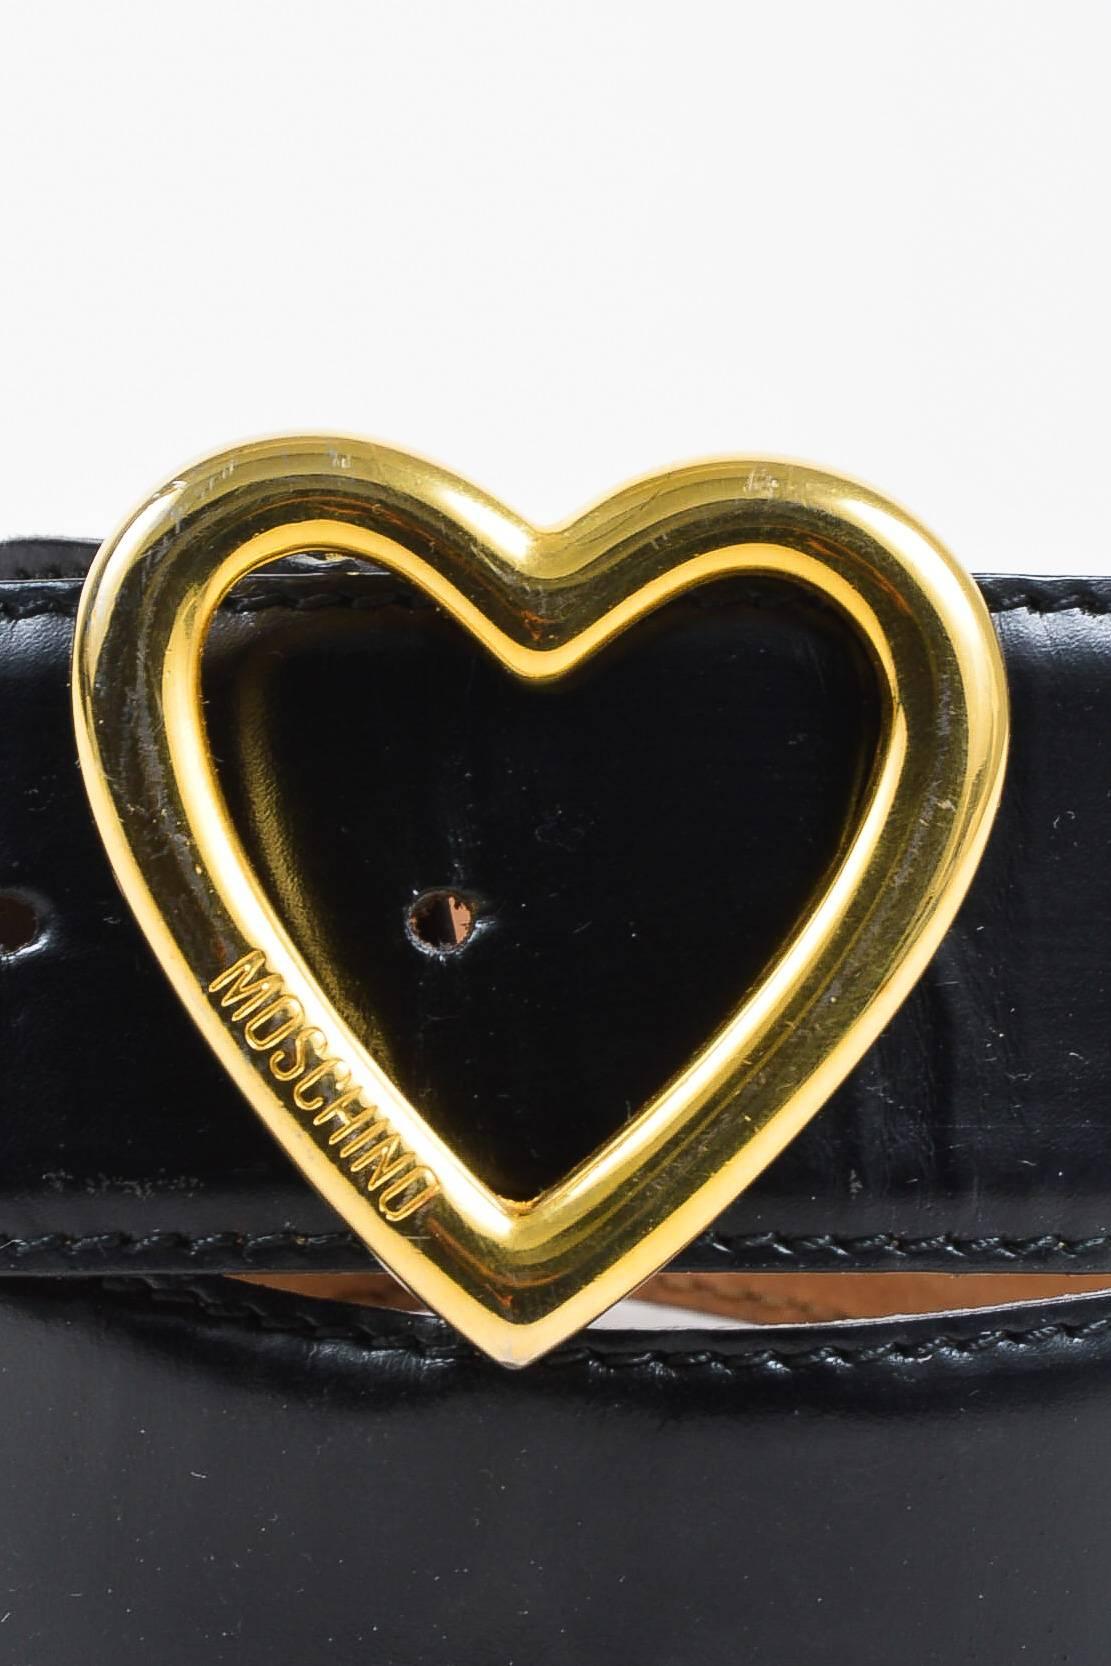 Released around the late 1980's to early 1990's, this vintage belt features a golden metallic heart-shaped buckle, glossy leather, and a wide body. Wear over a voluminous jumpsuit to complete the look.

Size	
40 (IT), 2-4 (US)
US Size